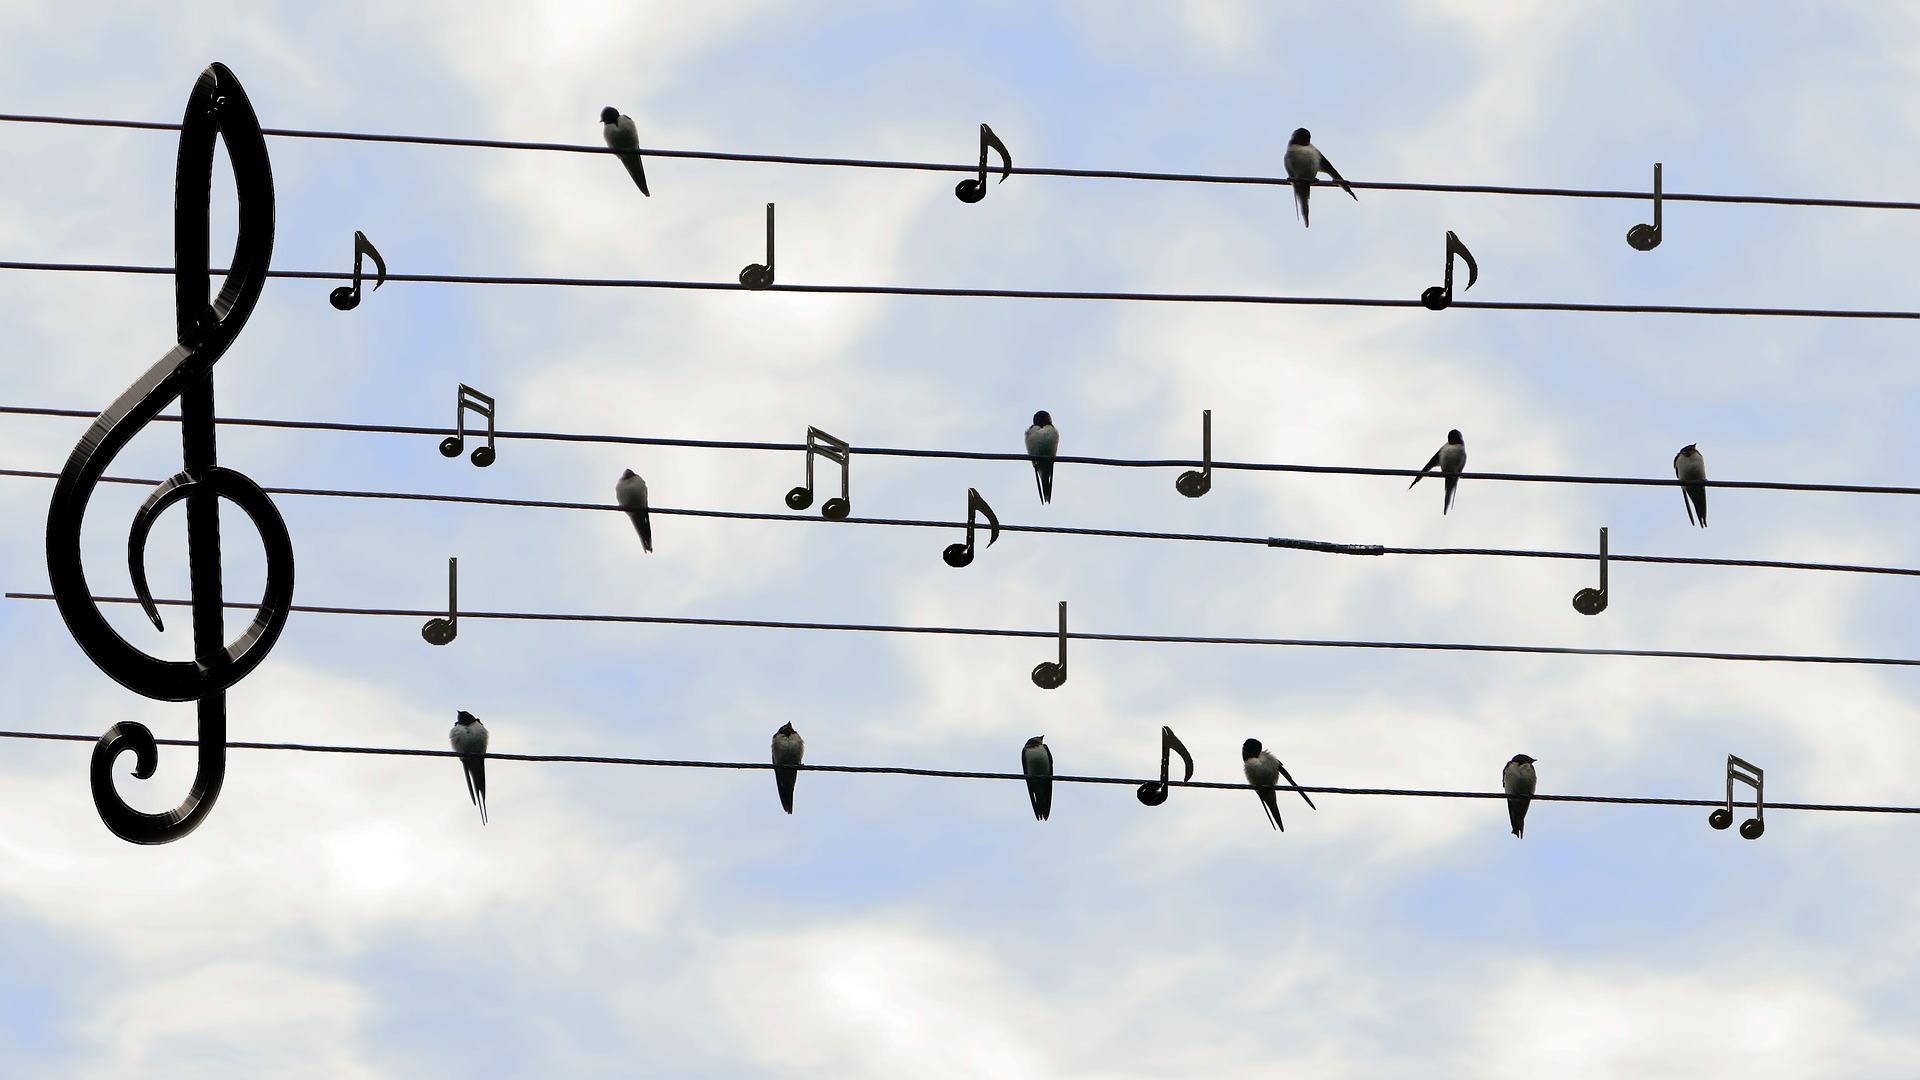 Birds and musical notes on telephone wires.